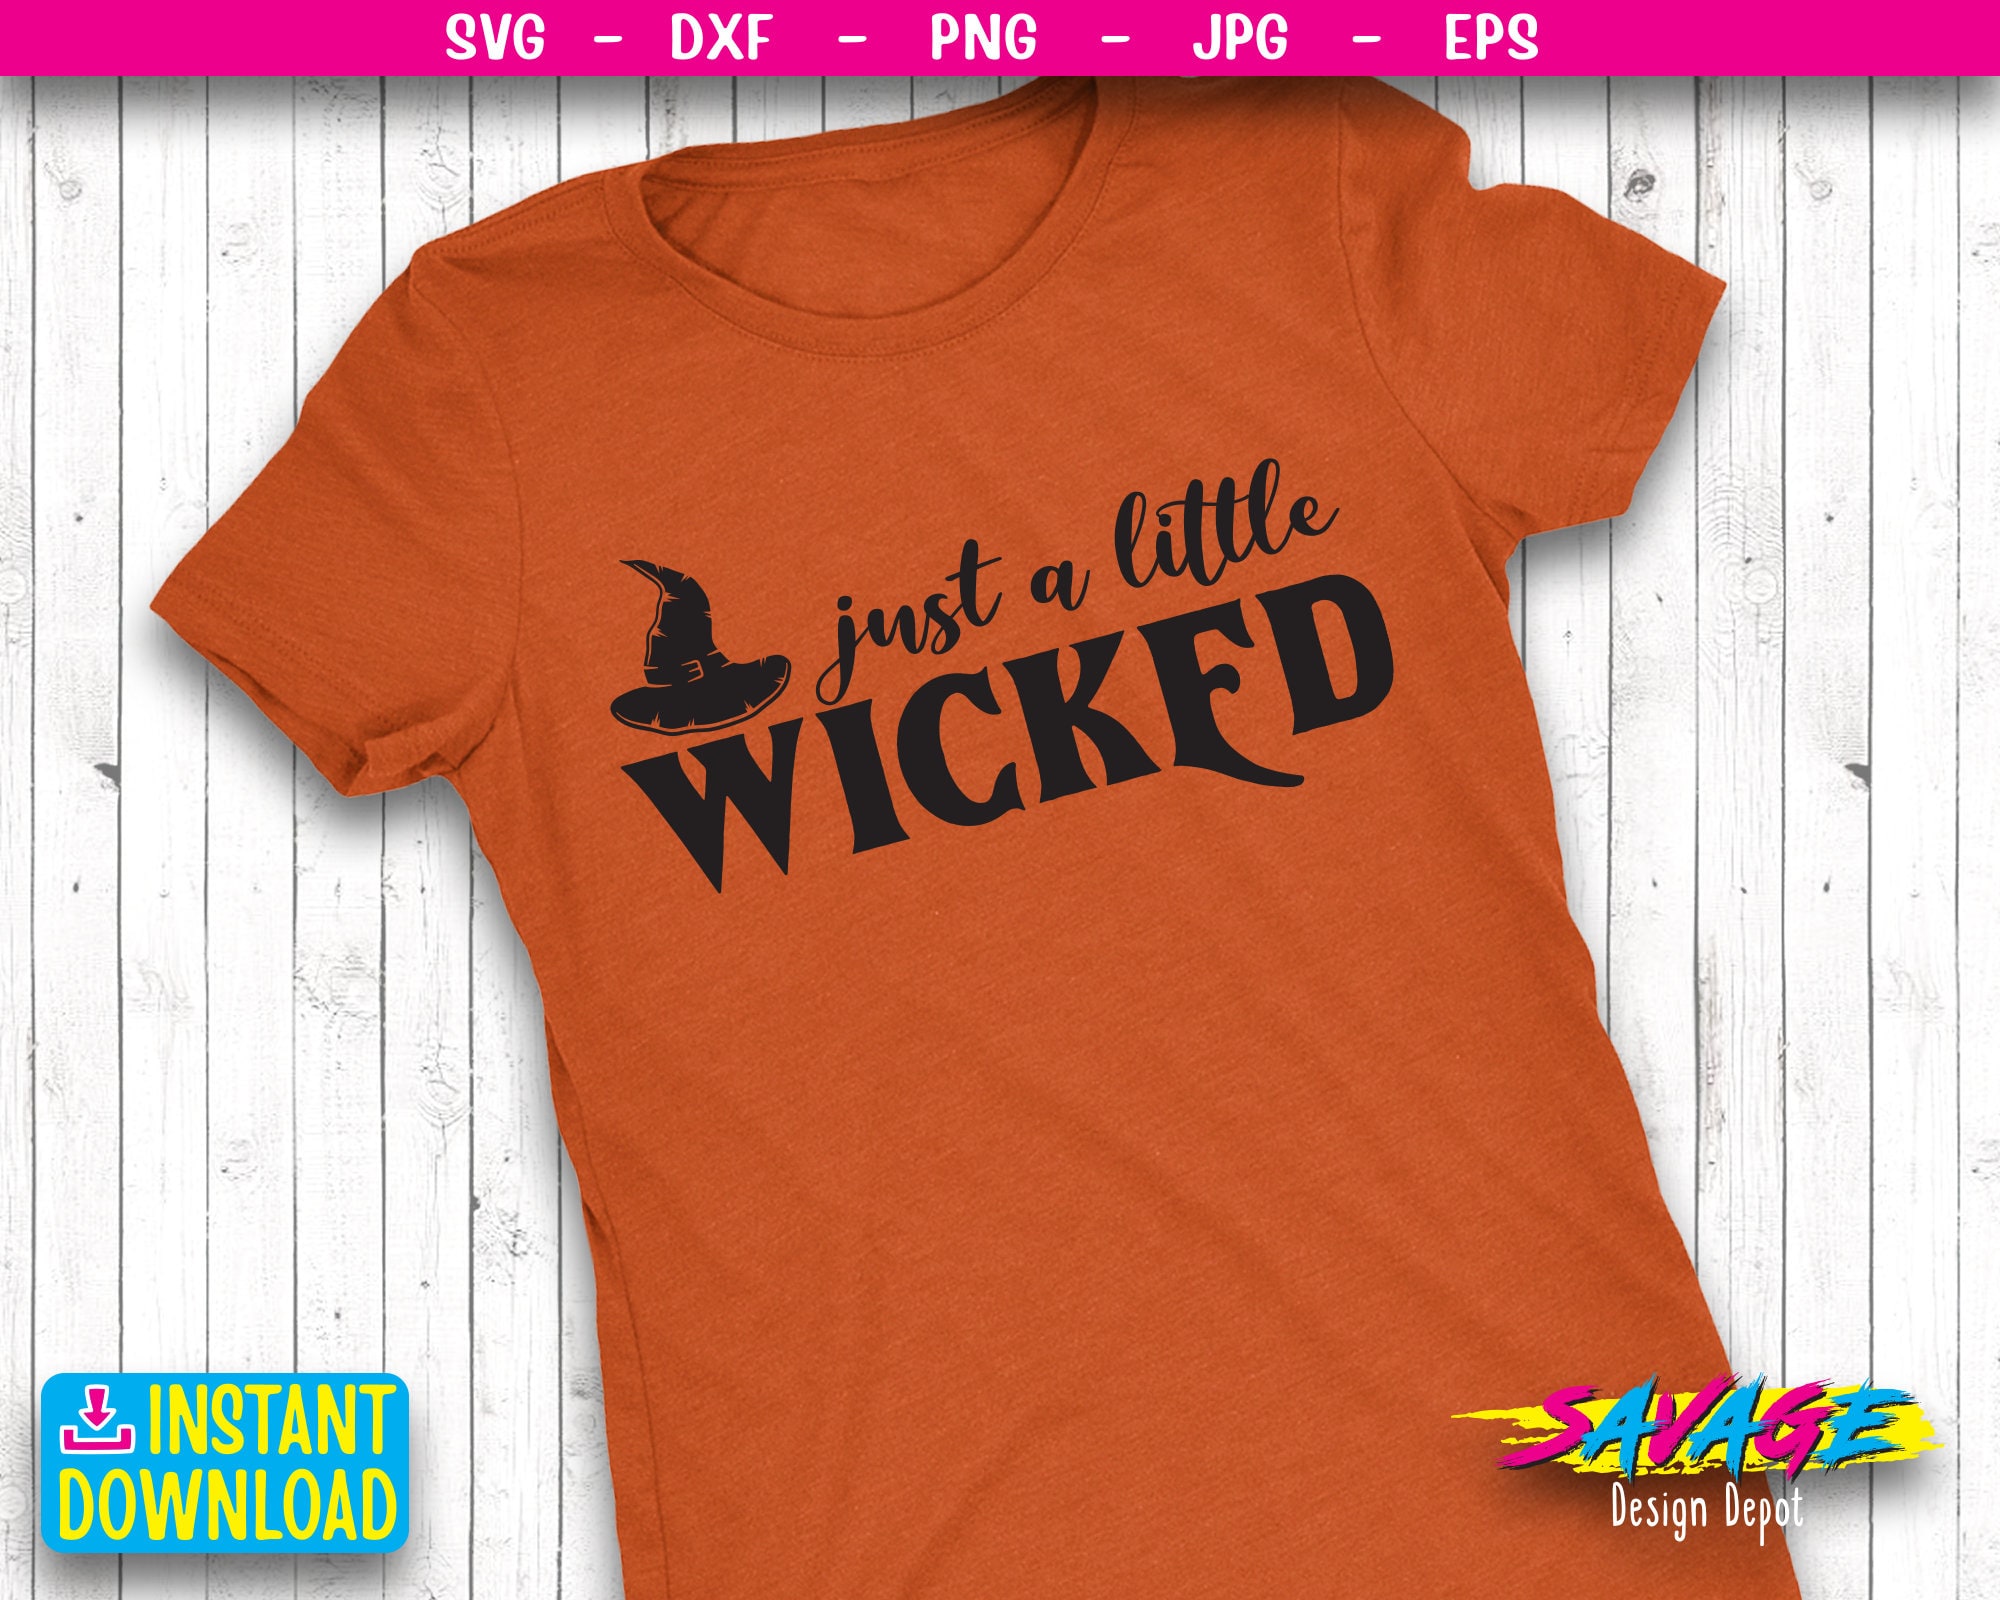 Just a little wicked t-shirt SVG | witch t-shirt svg Download file |  Halloween T-Shirt design SVG files for Cricut | svg file | Png file 